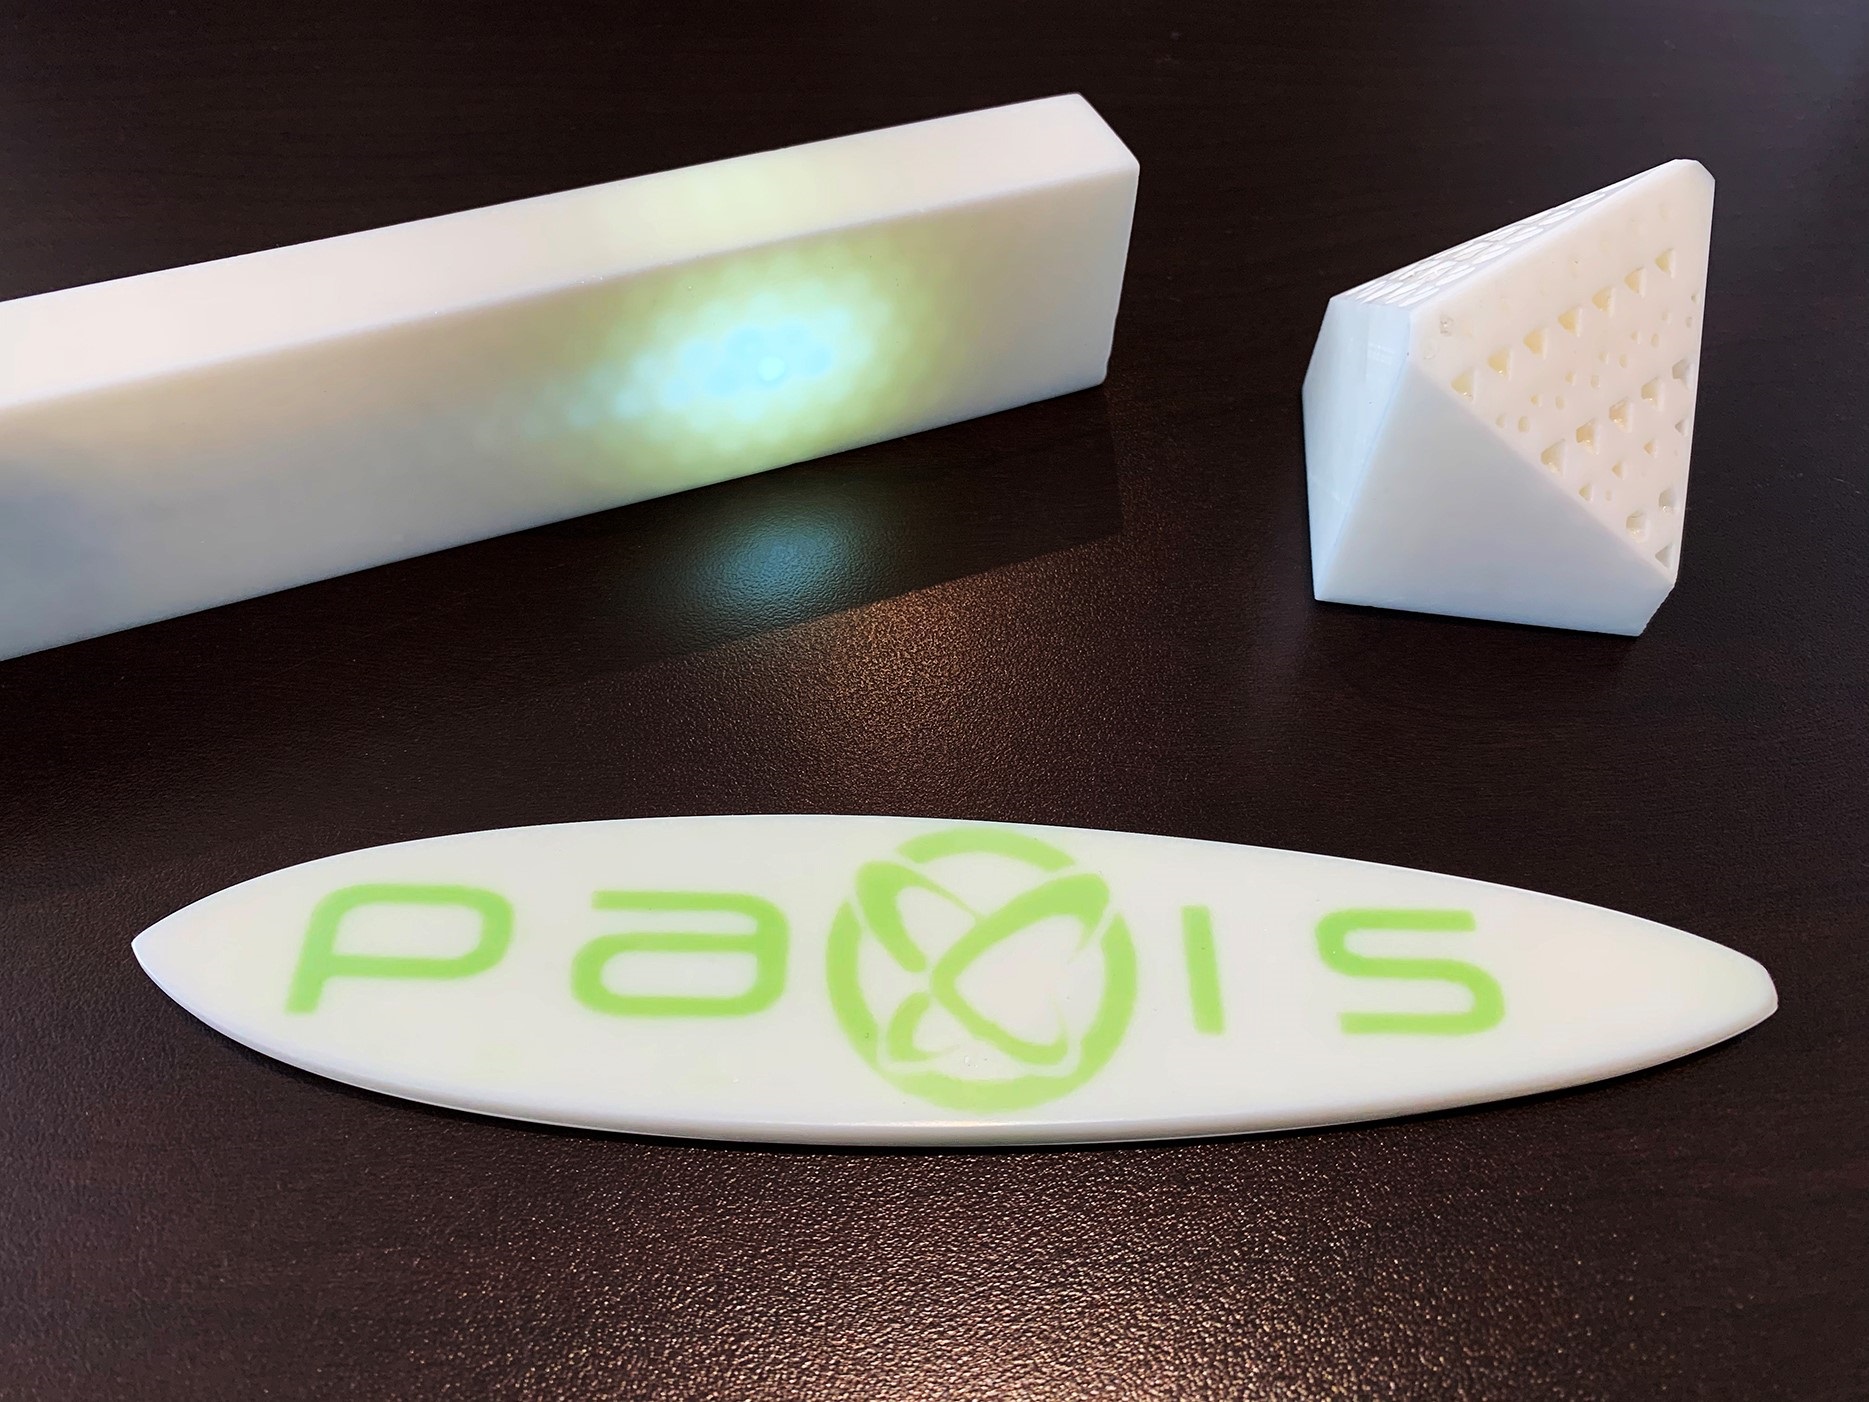 Paxis and Sartomer are working together to create 3D printing materials using Paxis' WAV 3D printing process. Photo via Paxis.